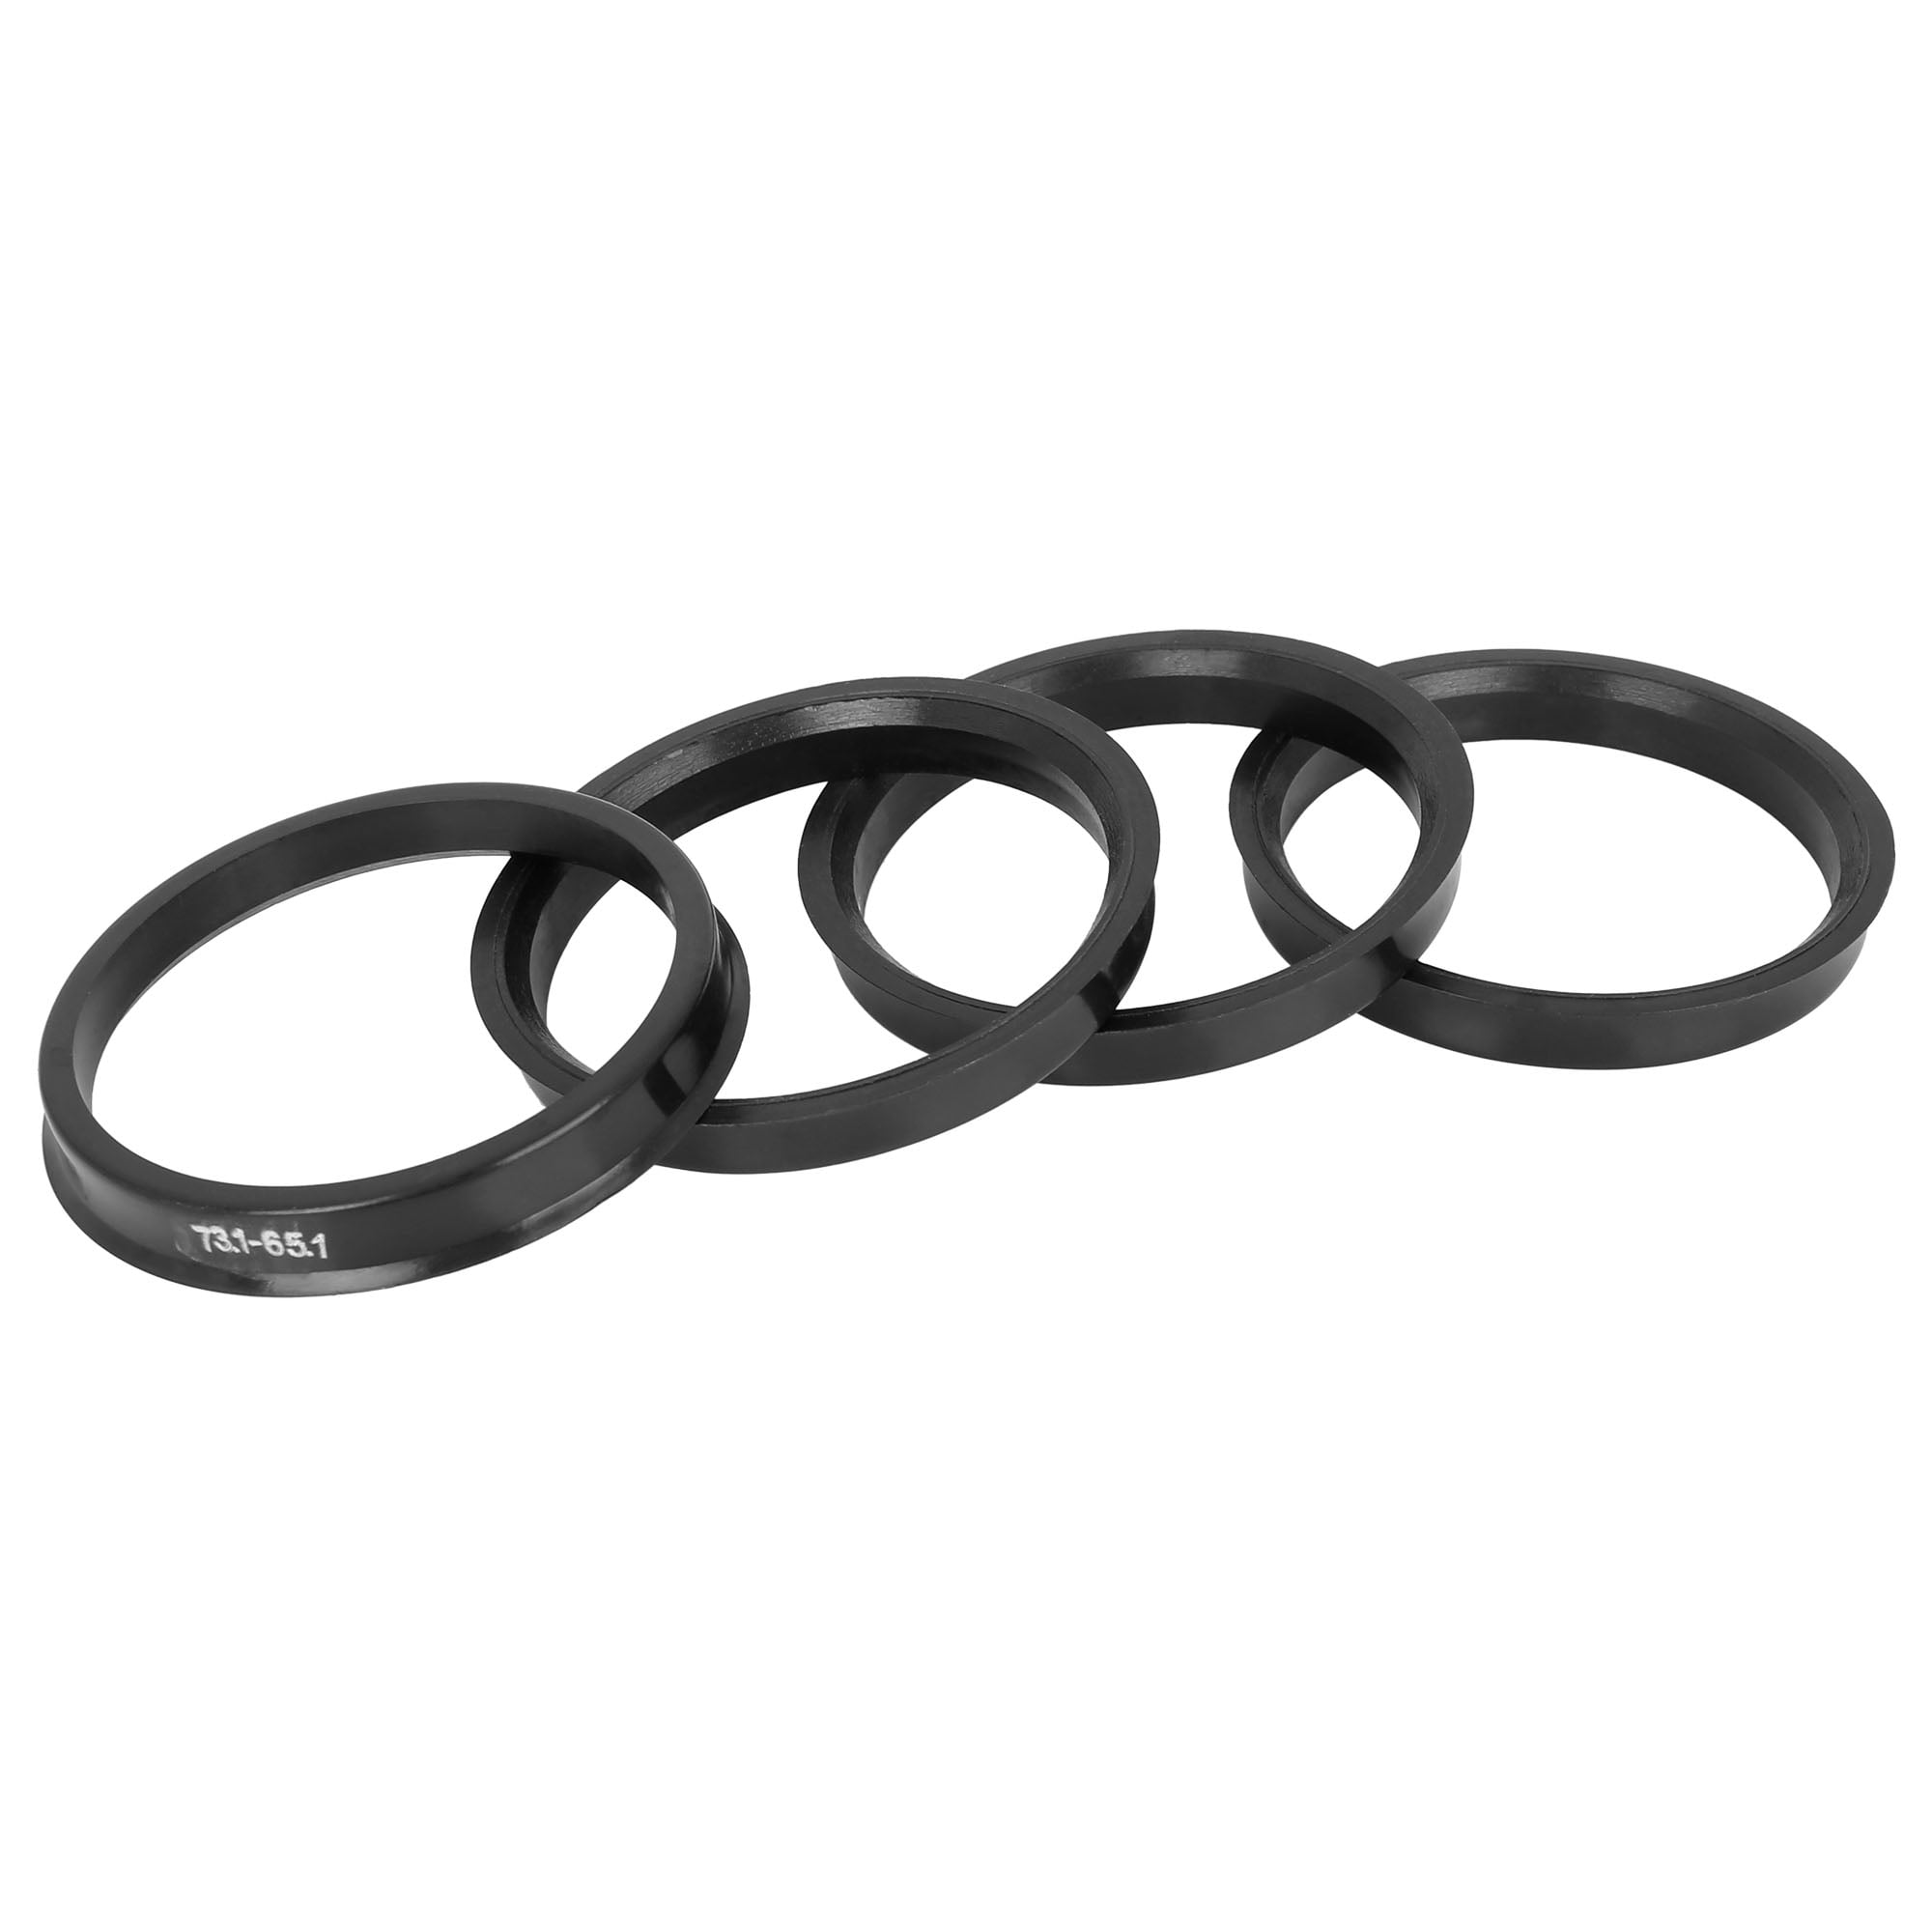 Set of 4 Wheel Connect Hub Centric Rings ABS Plastic Hubrings O.D:73.1-I.D:65.1mm.